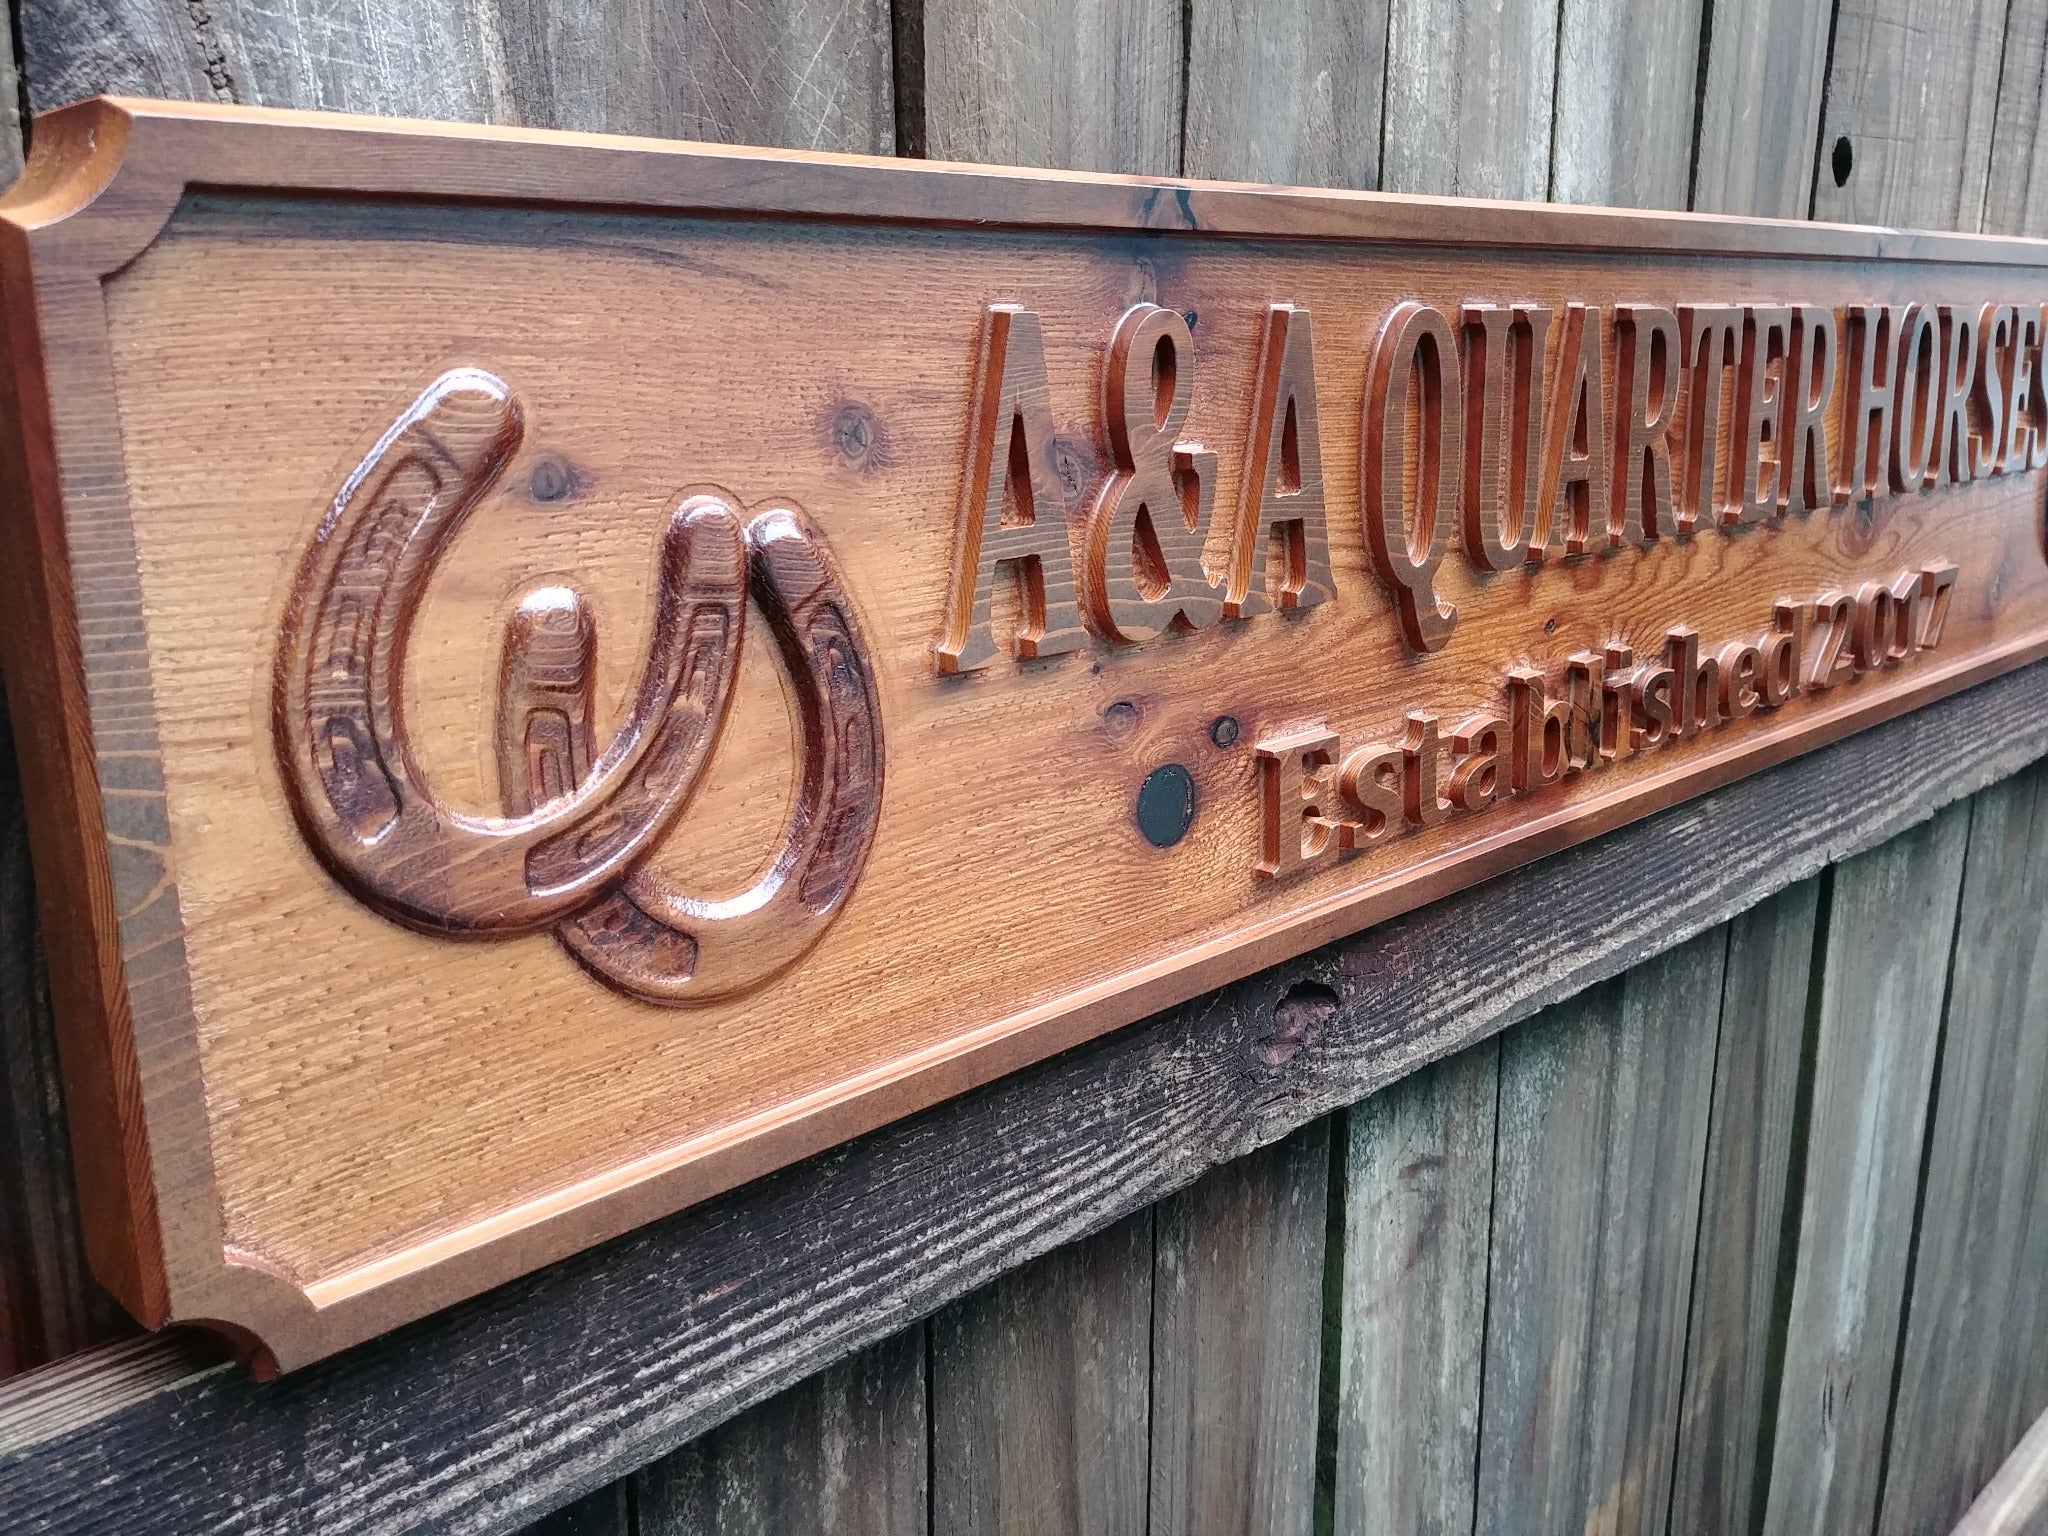 vintage looking wooden business signs outdoor